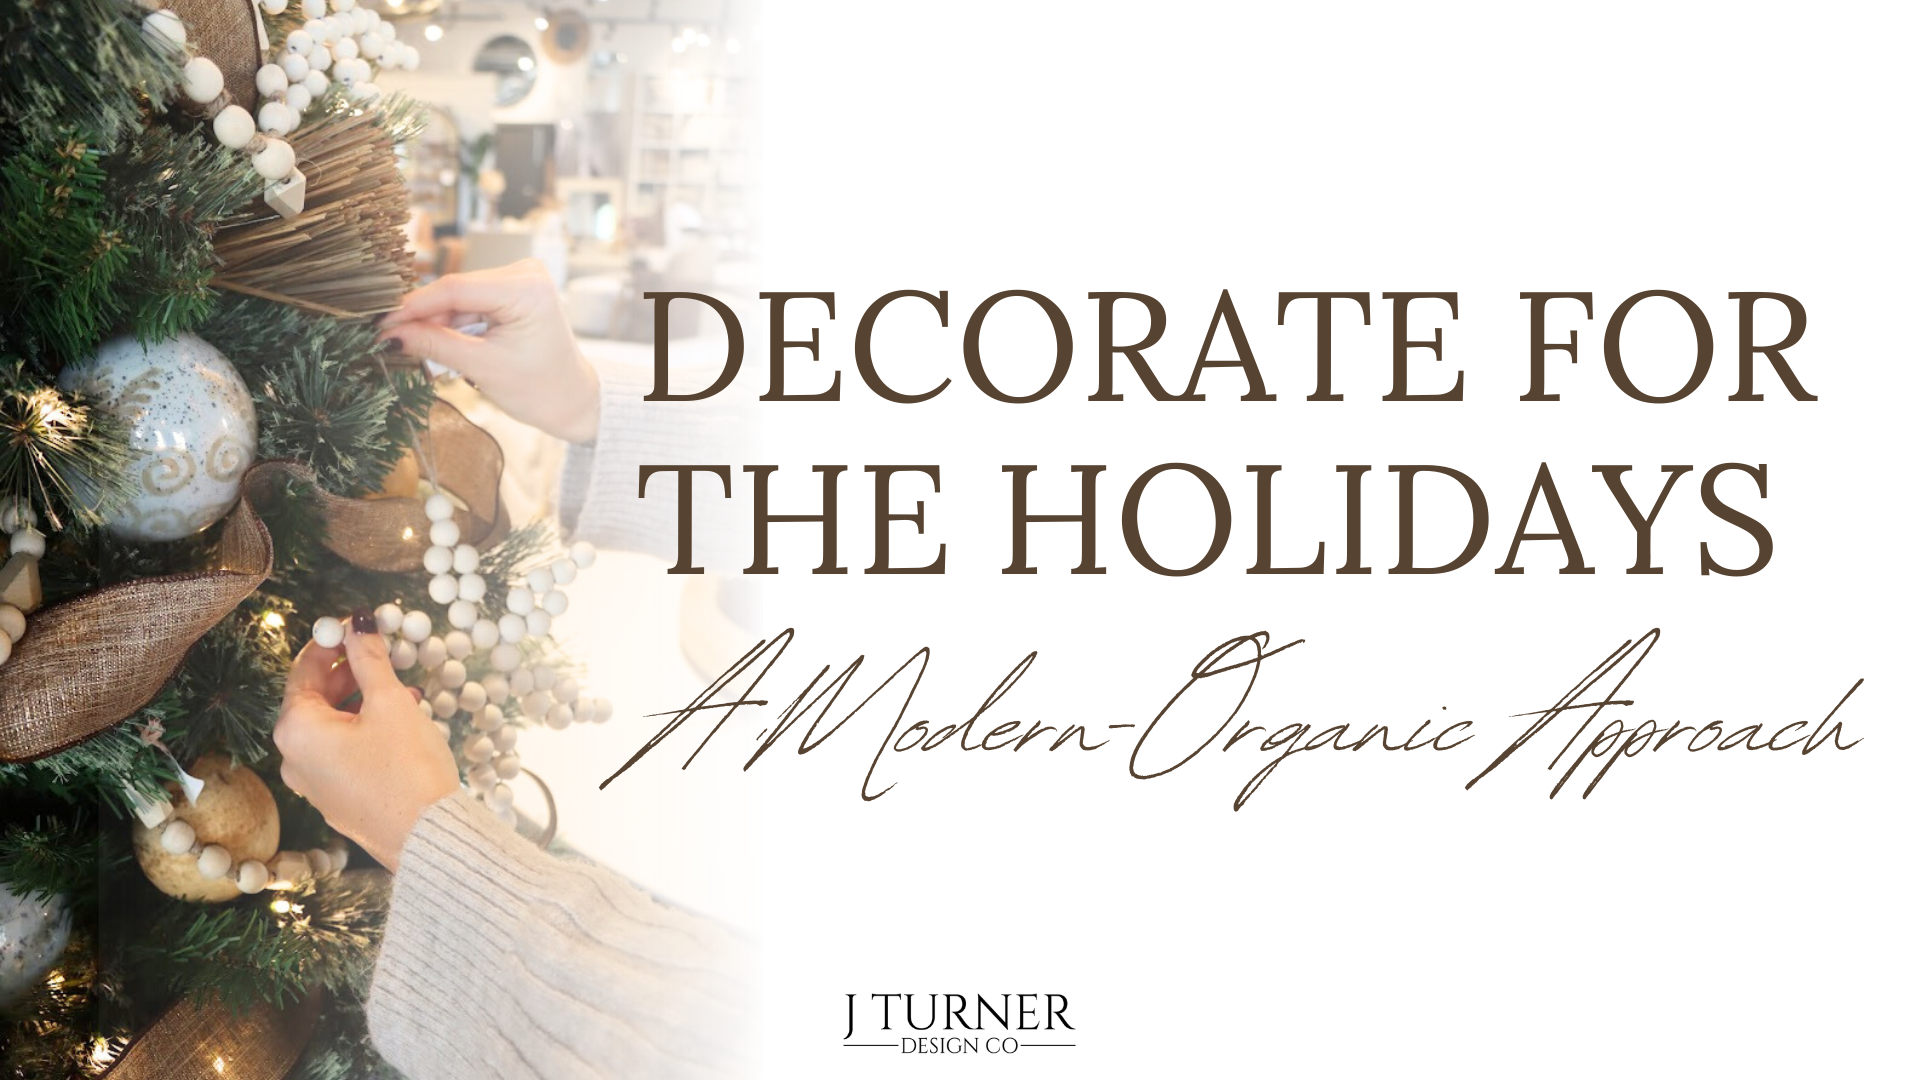 Decorate for the Holidays: A Modern-Organic Approach